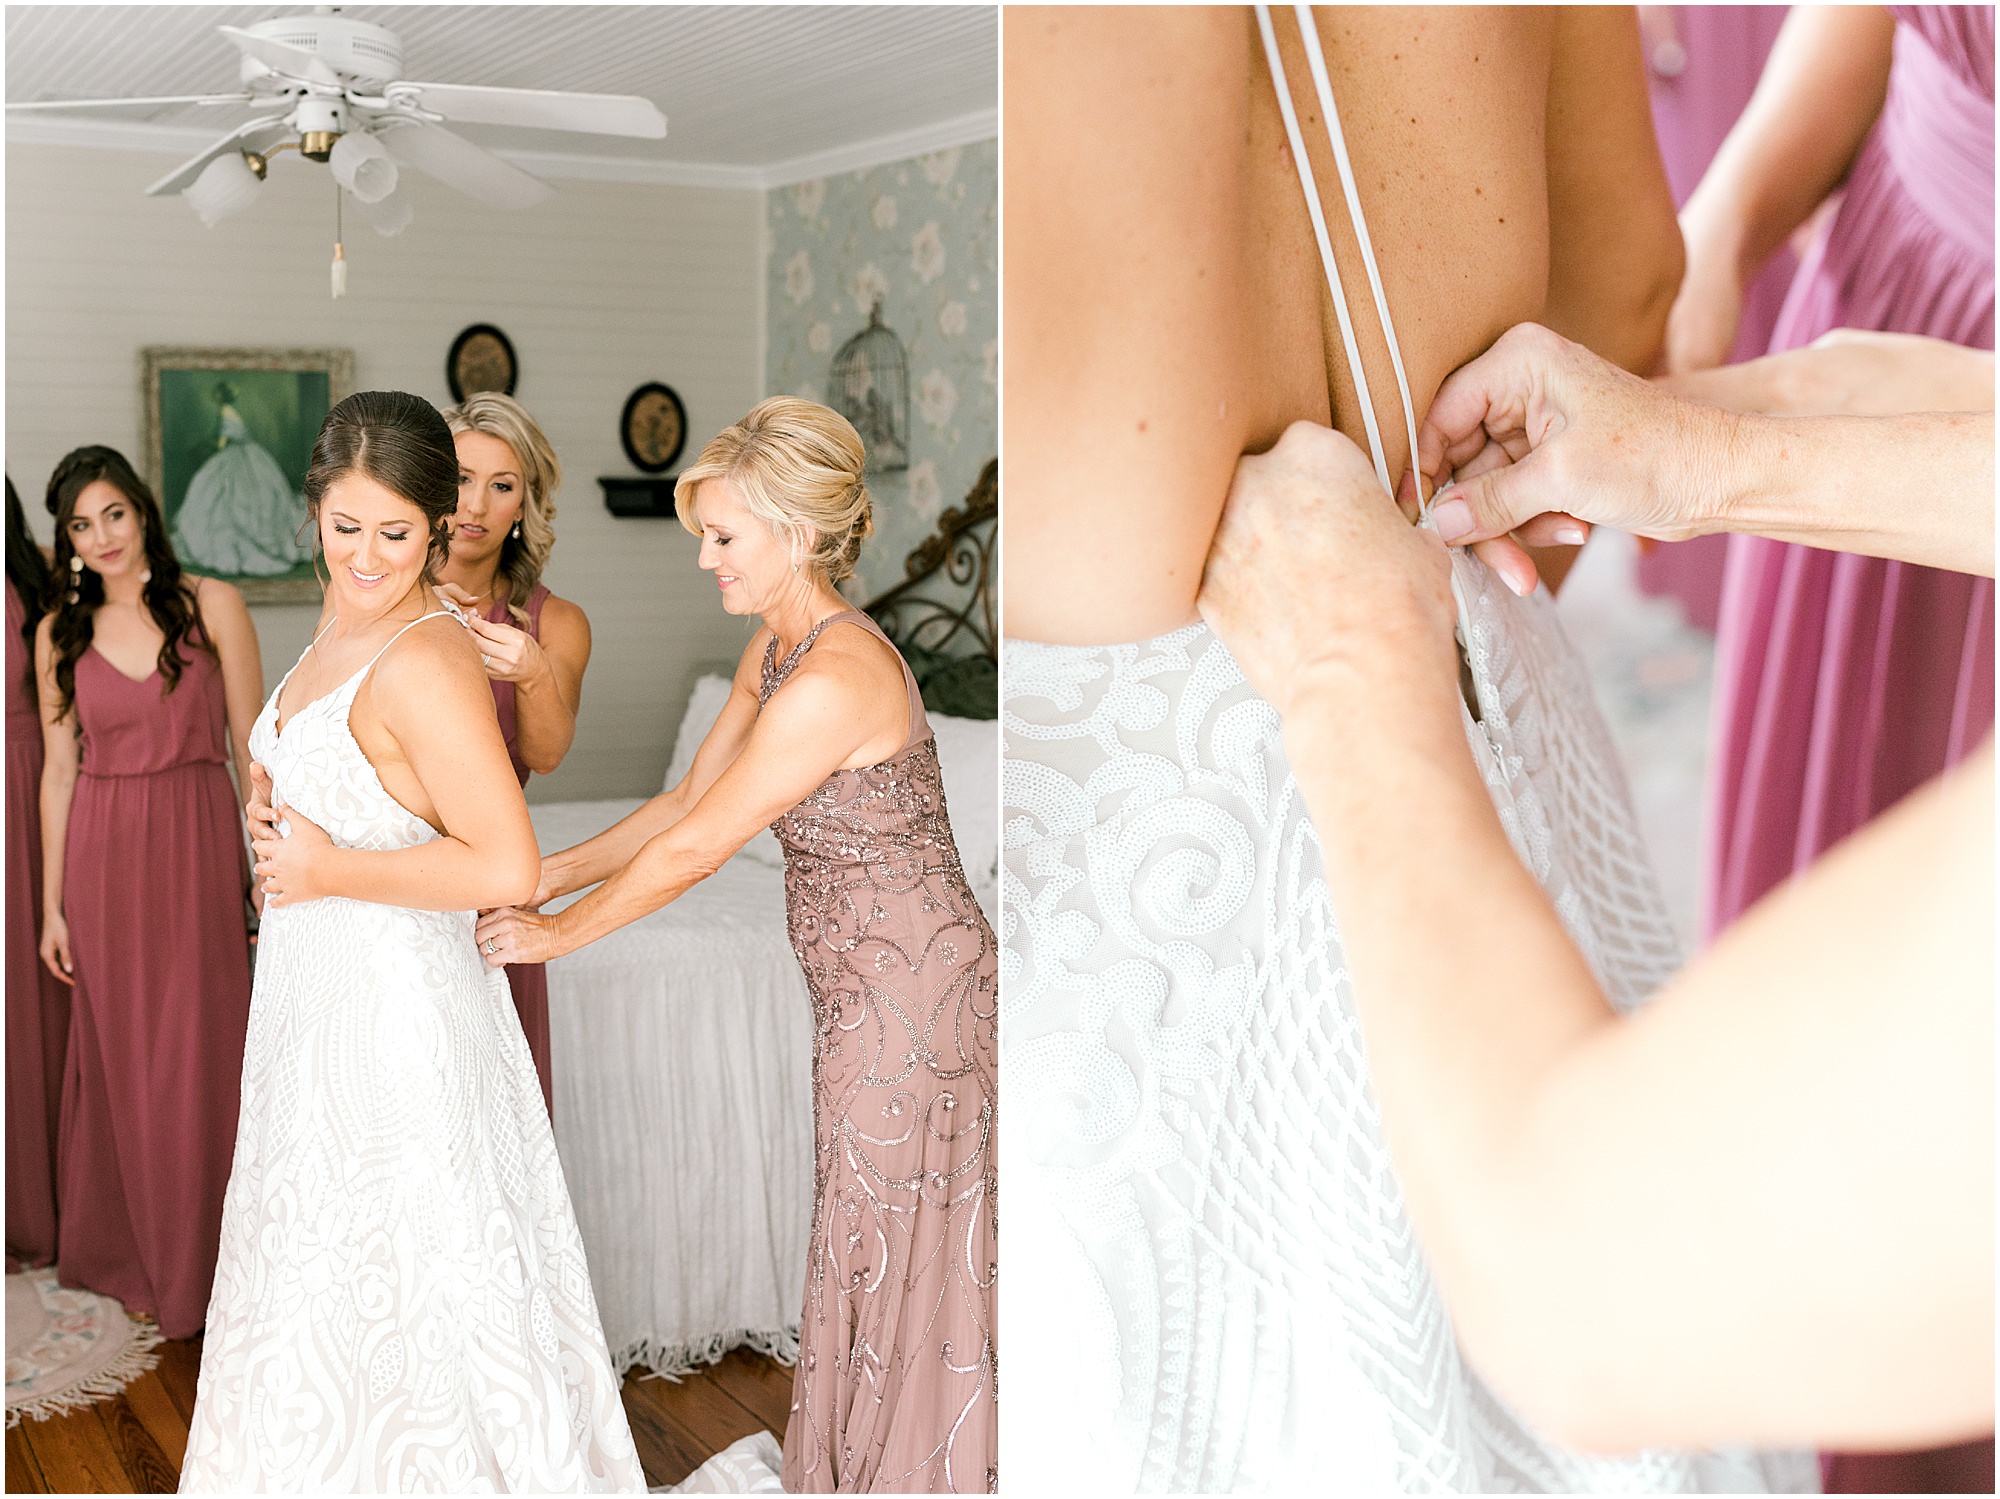 Bride being helped into her dress with bridesmaids in shades of dusty rose and burgundy looking on. 